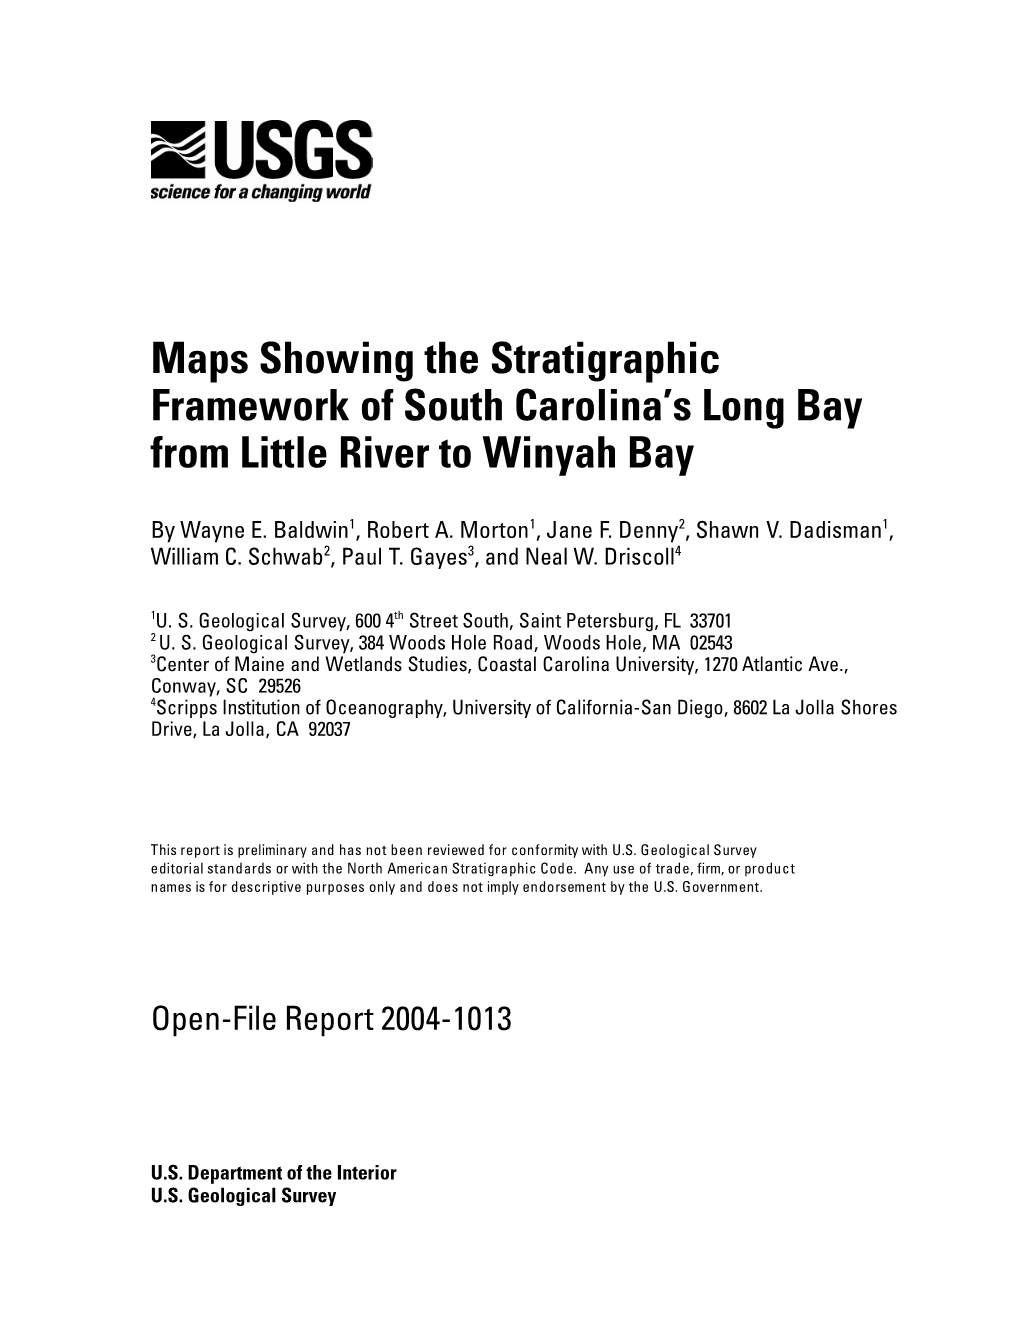 Maps Showing the Stratigraphic Framework of South Carolina's Long Bay from Little River to Winyah